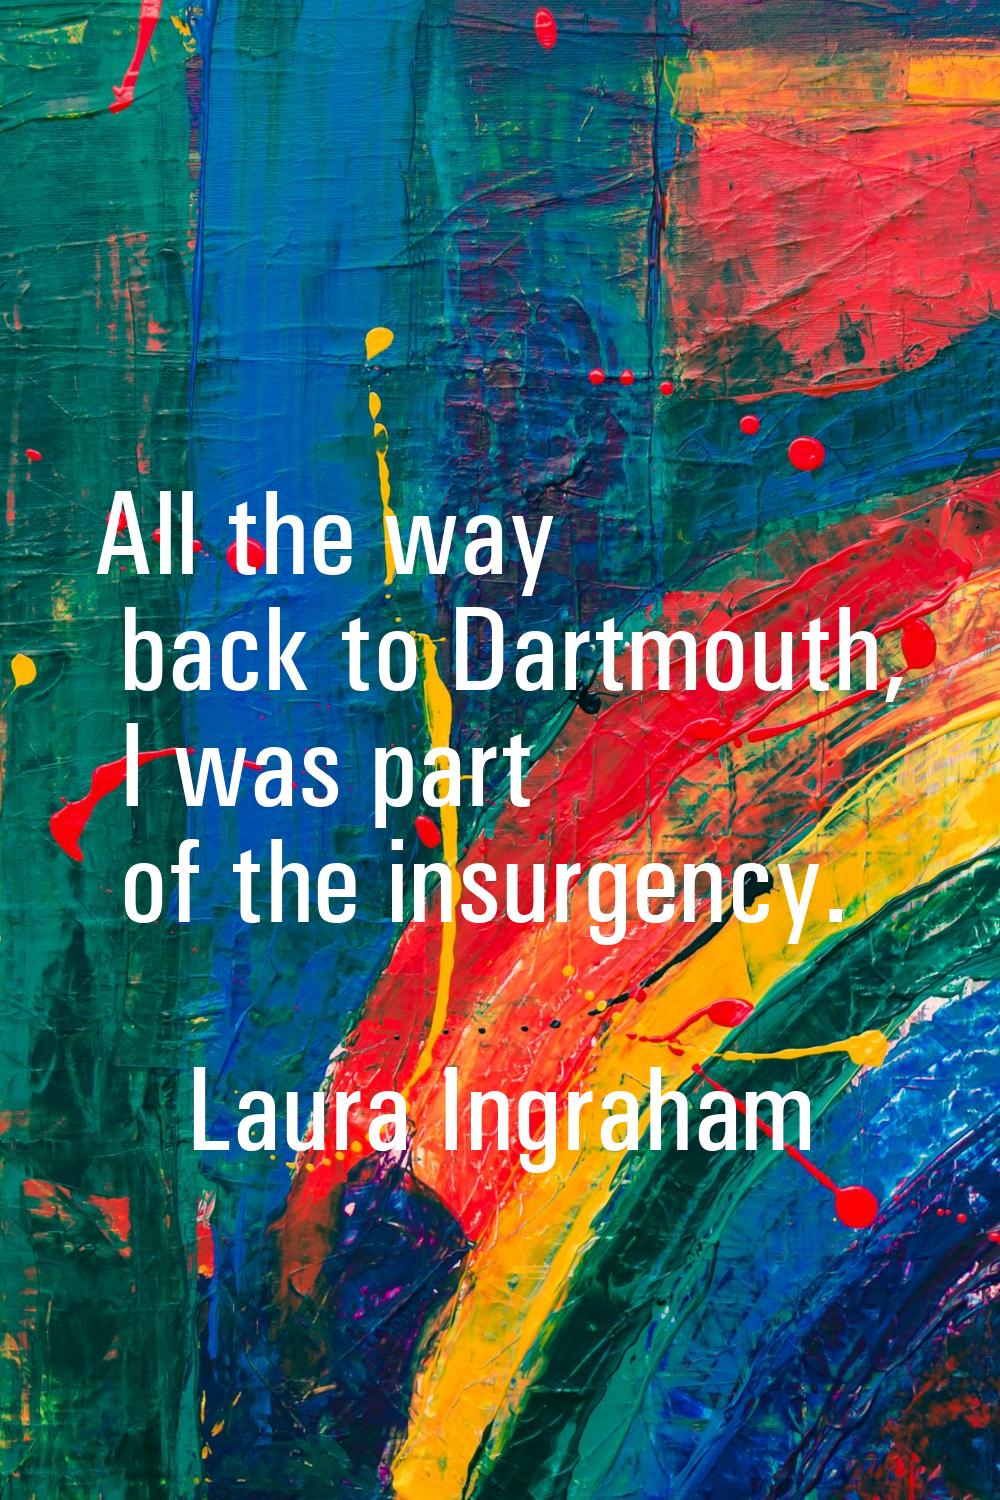 All the way back to Dartmouth, I was part of the insurgency.